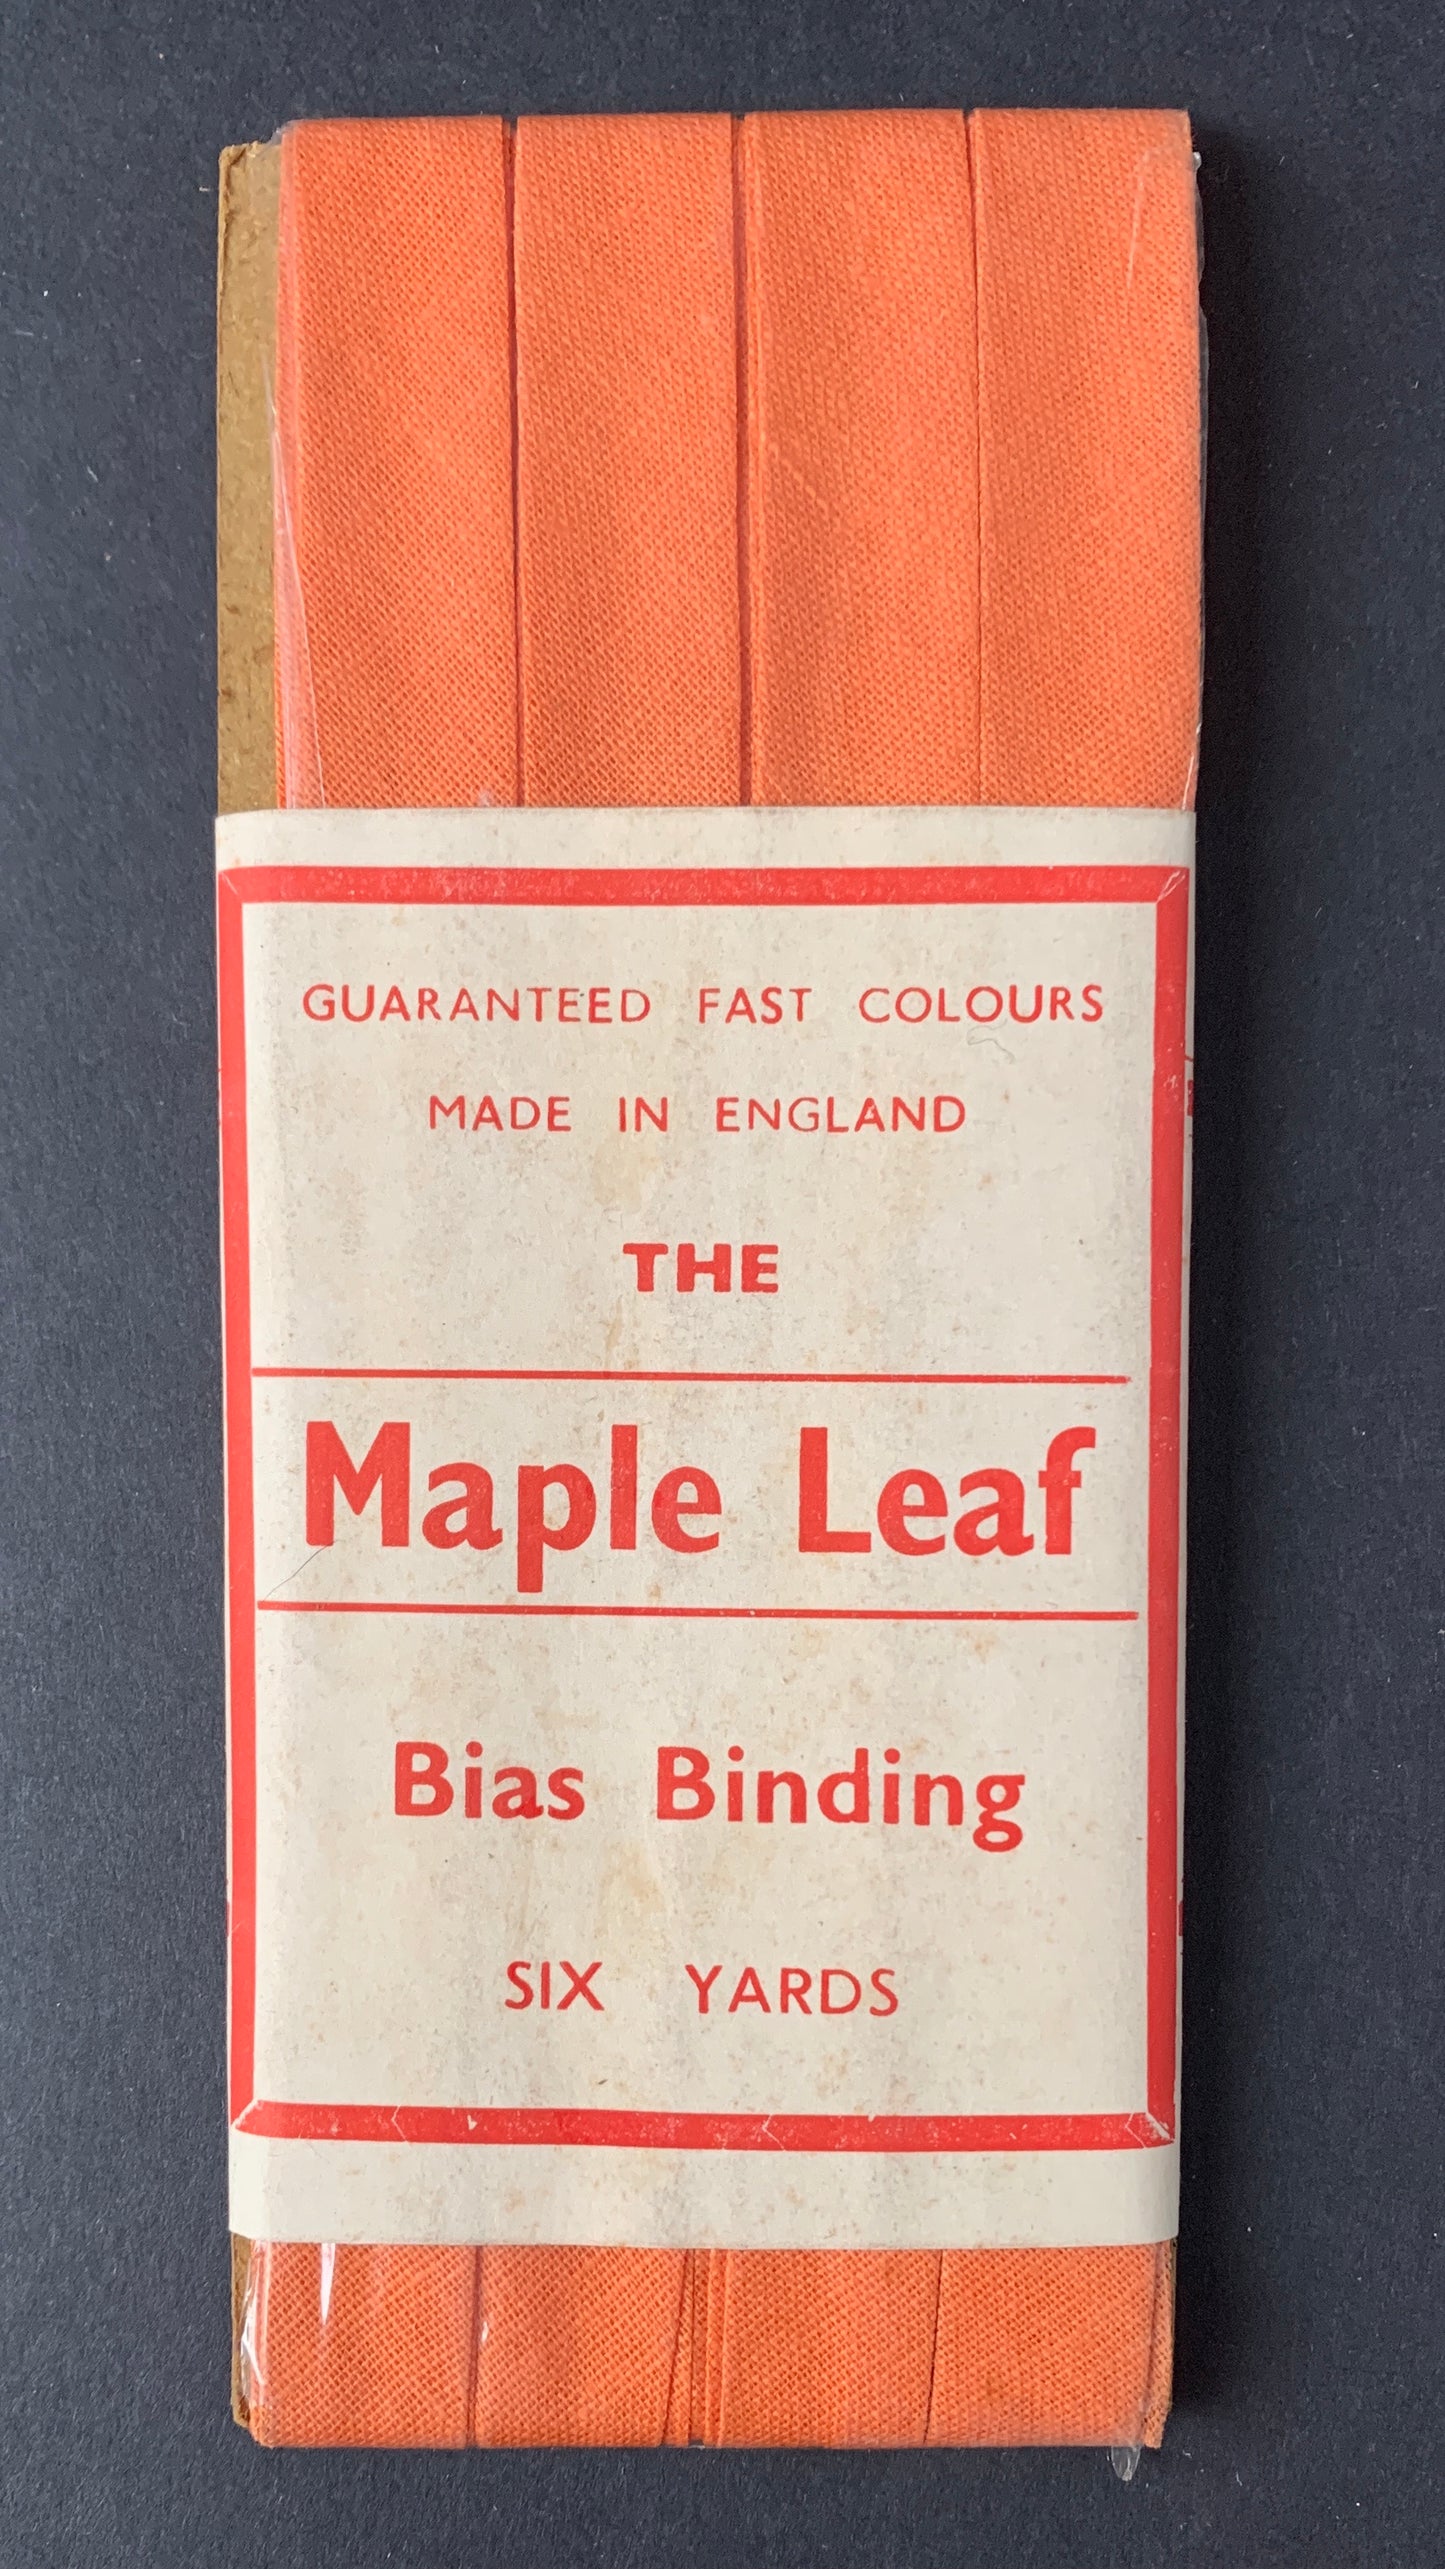 6yds Vintage Bias Binding Fold Tape Made in England - Choice of Colours